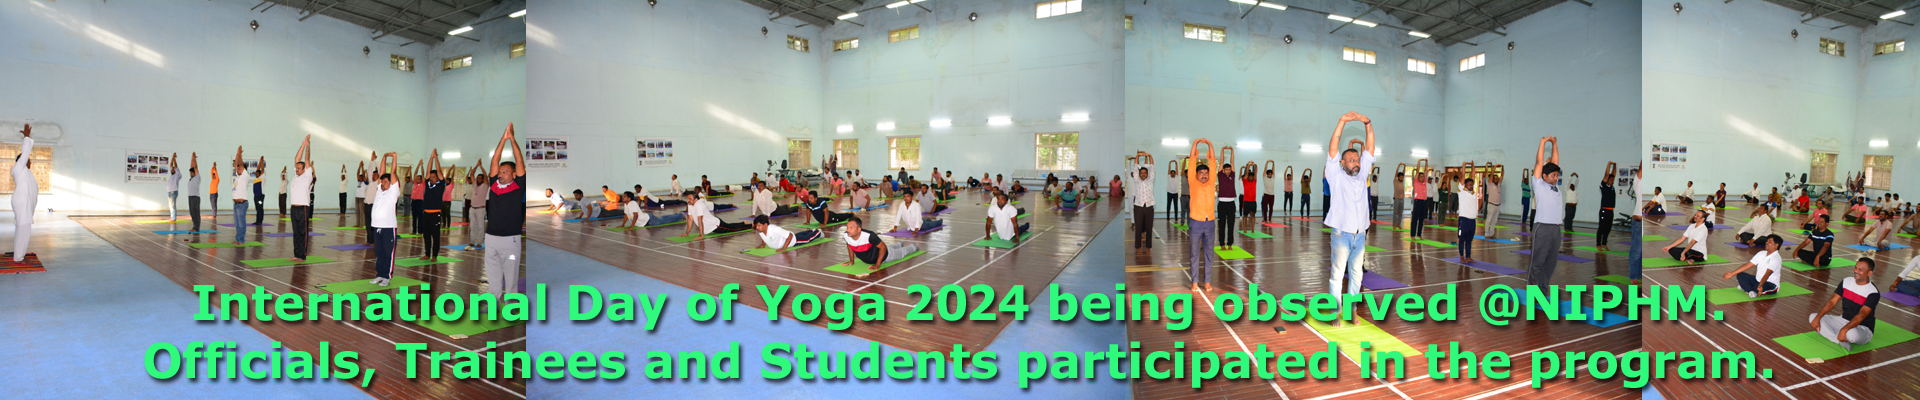 International Day of Yoga 2024 being observed @NIPHM. Officials, Trainees and Students participated in the program.